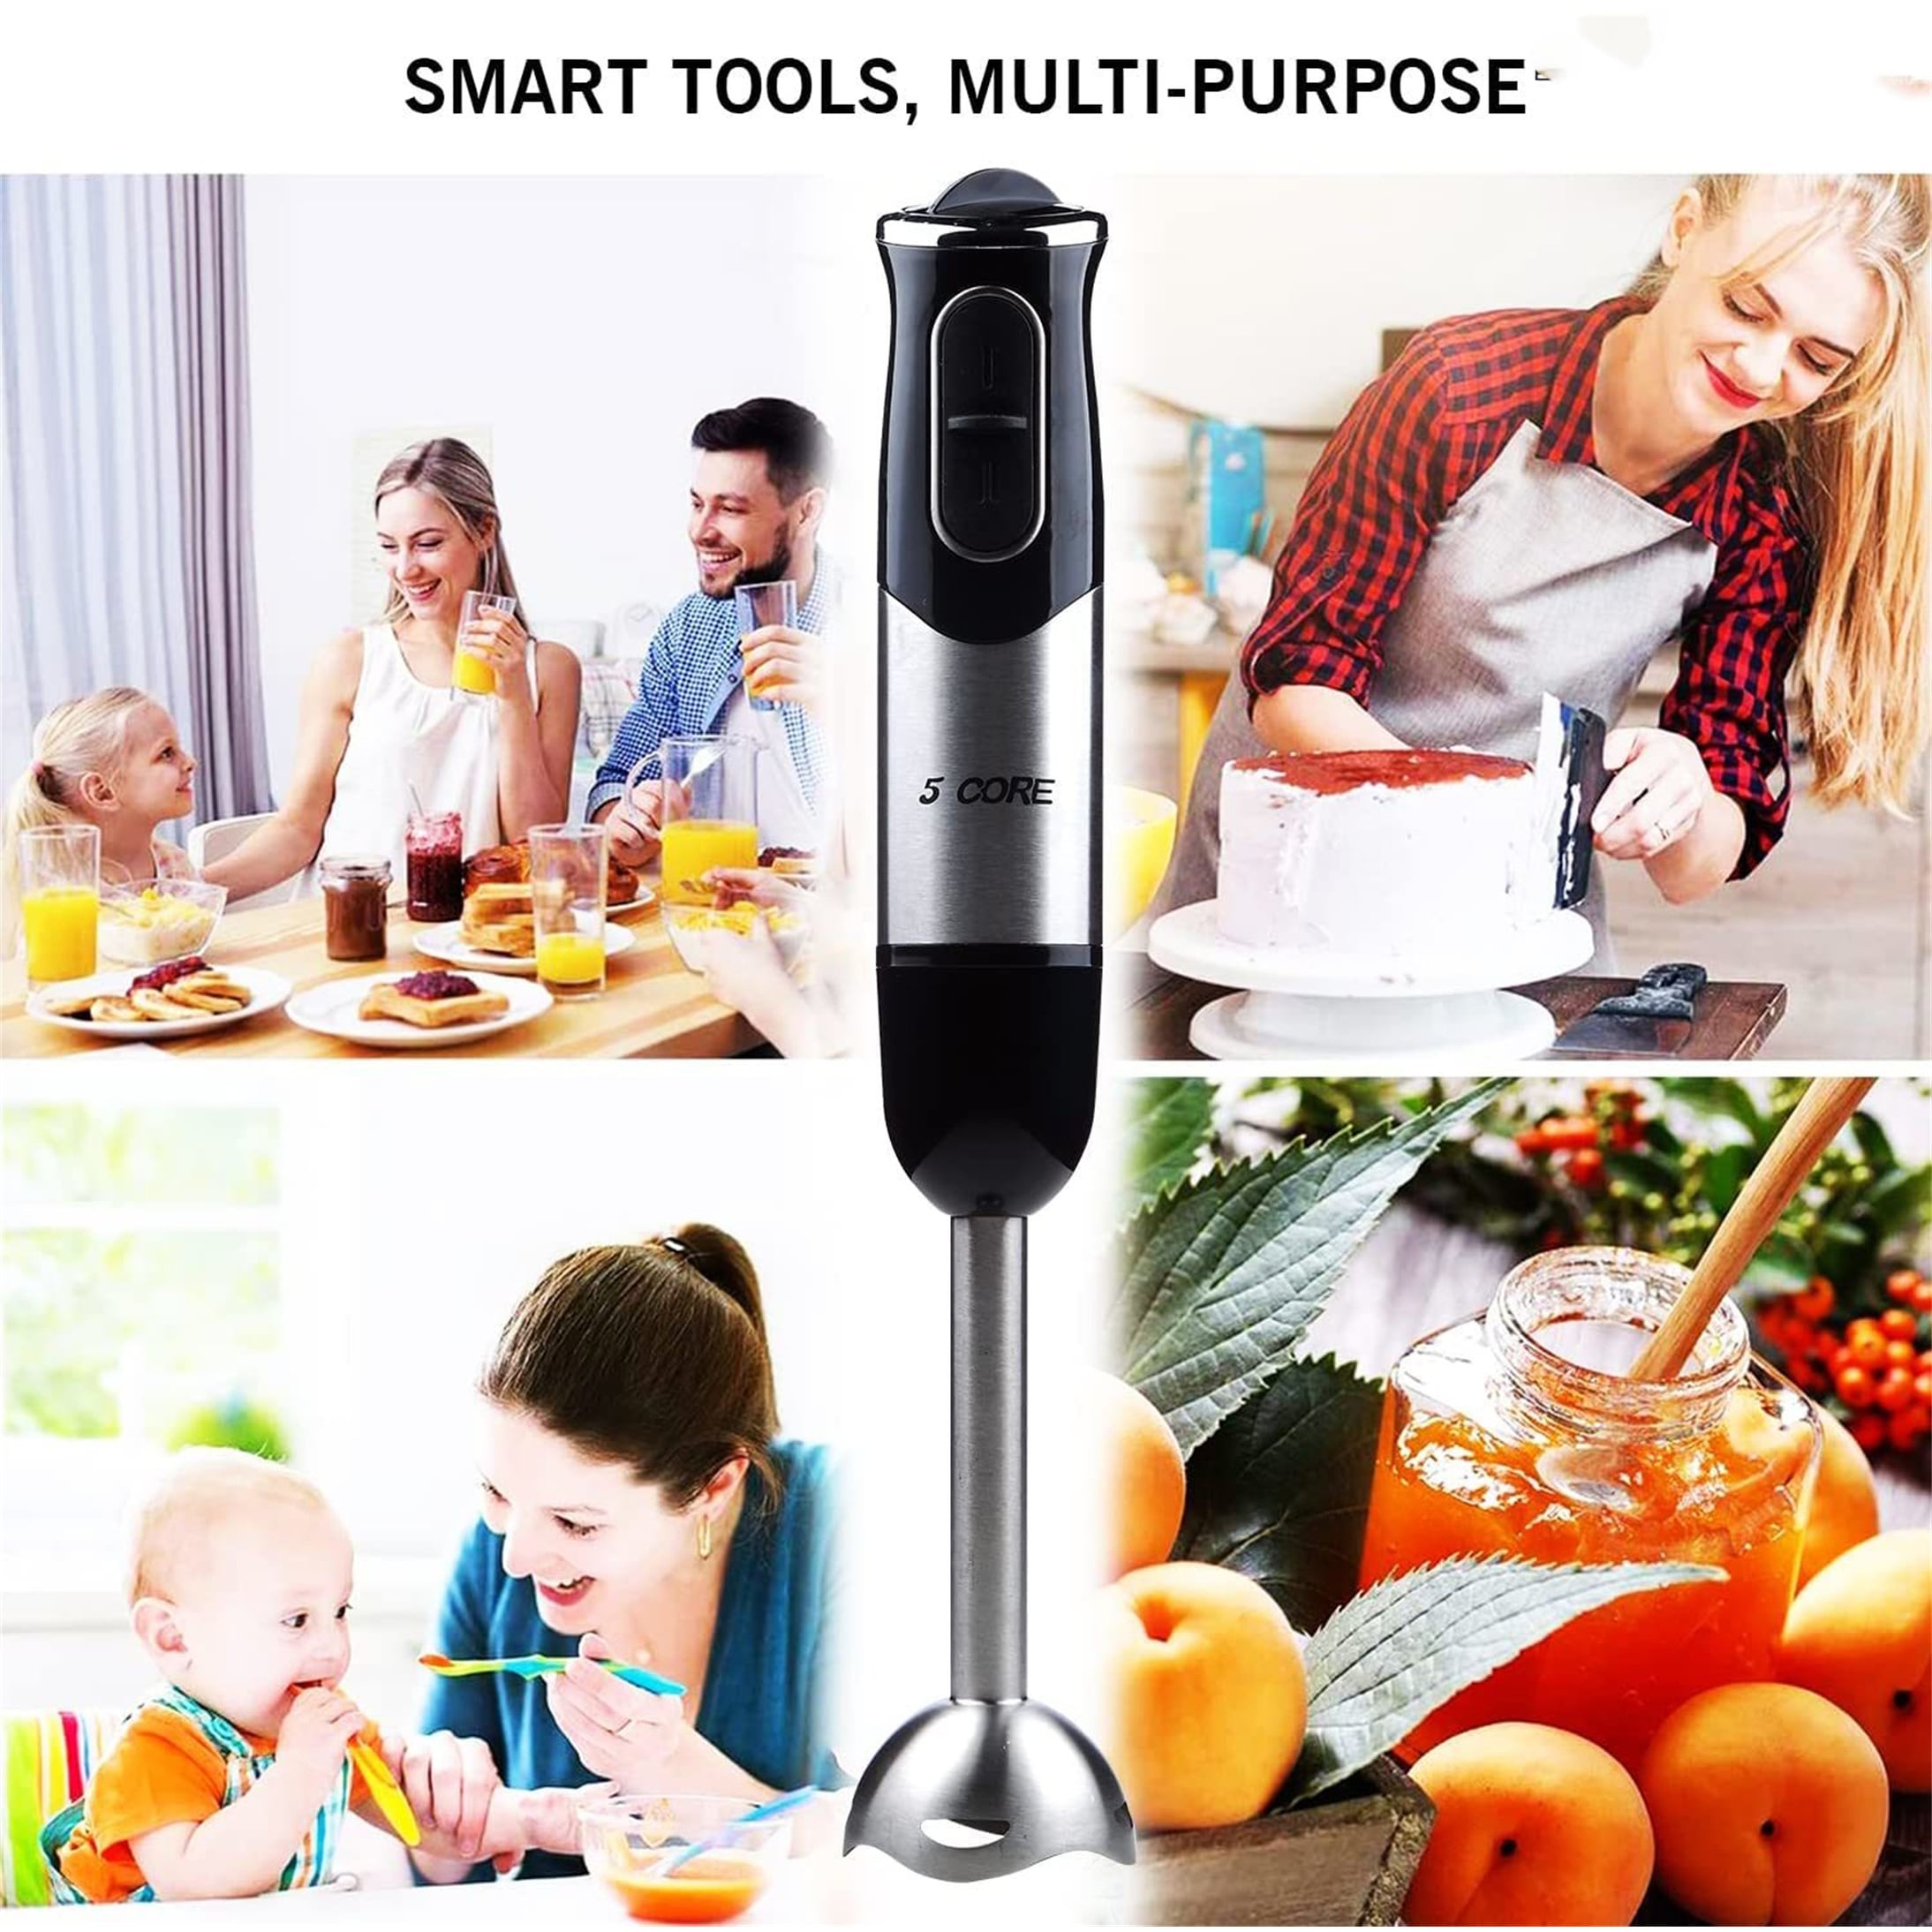 5 Core 500W Immersion Blender Handheld 2 Speed Stainless Steel